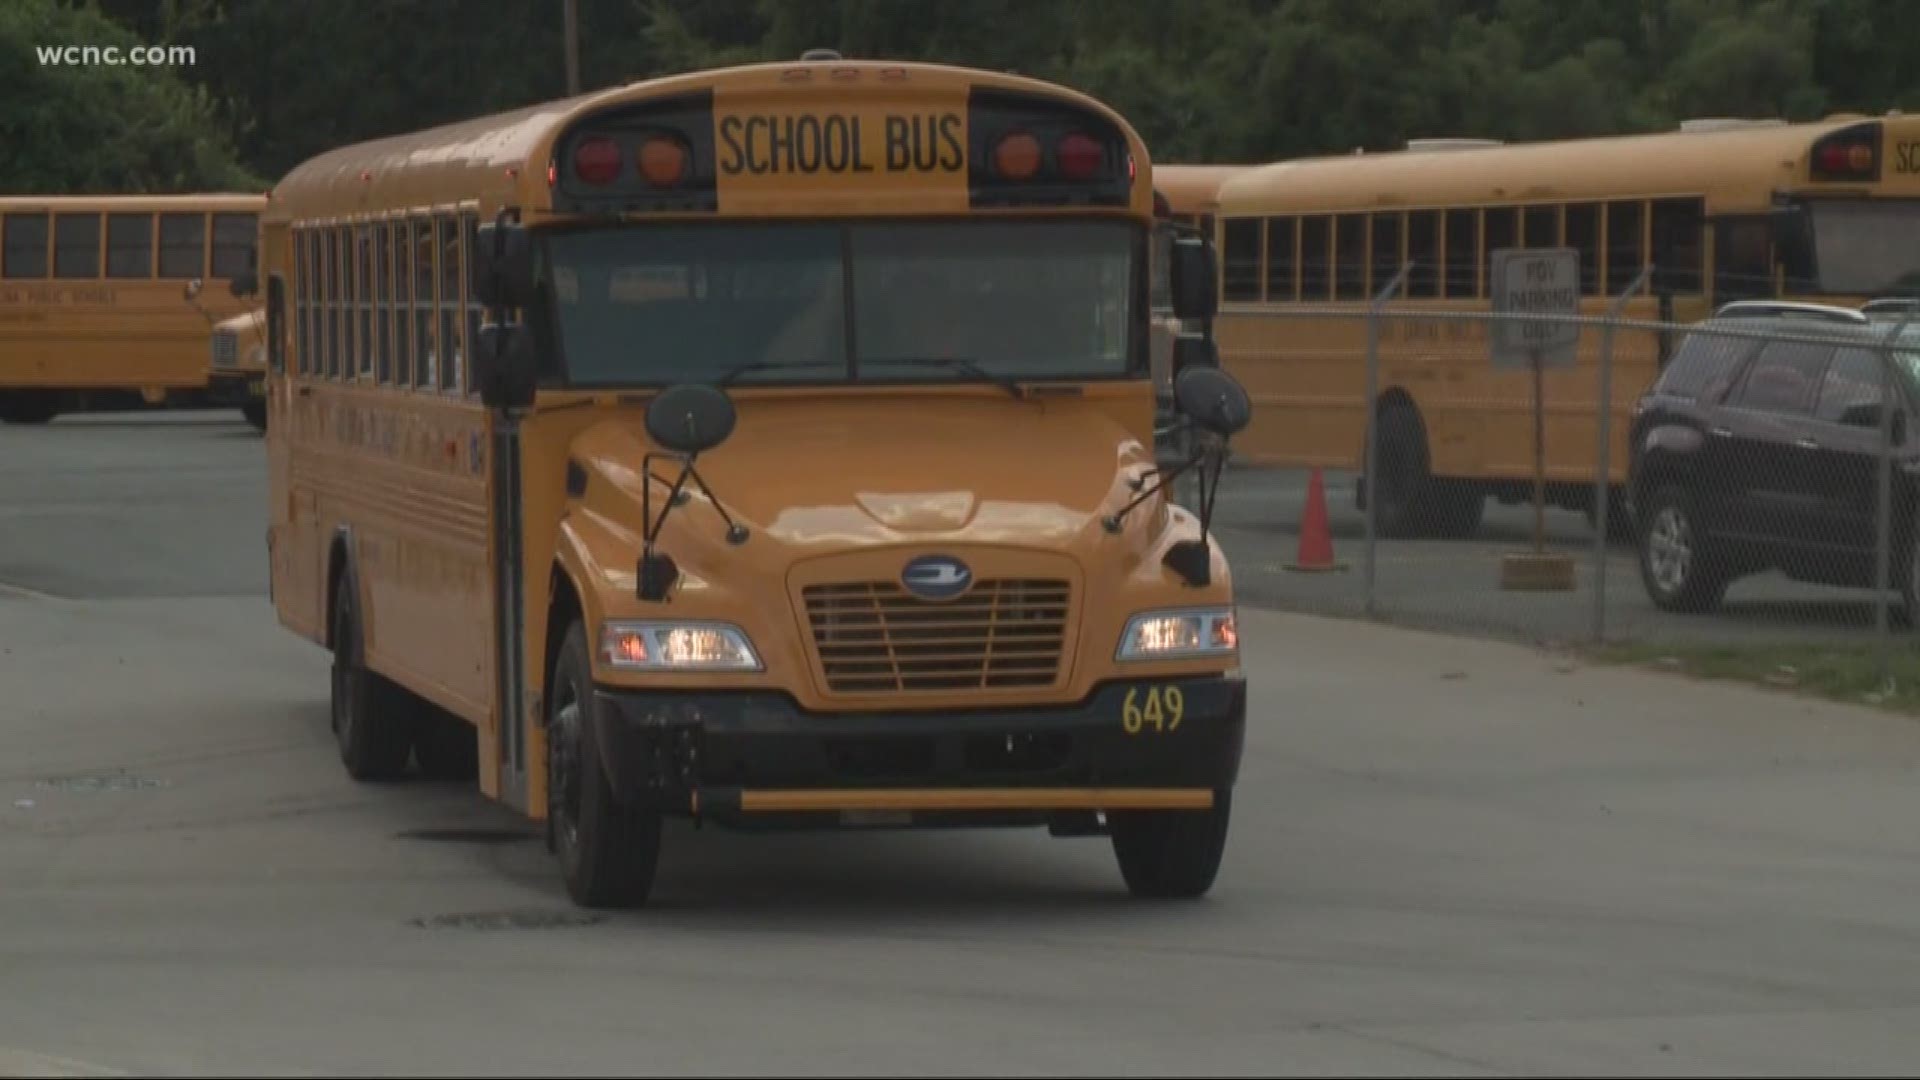 CMS officials are working to make sure the sometimes hour-plus long delays that some saw in bus service on the first day doesn't happen again.